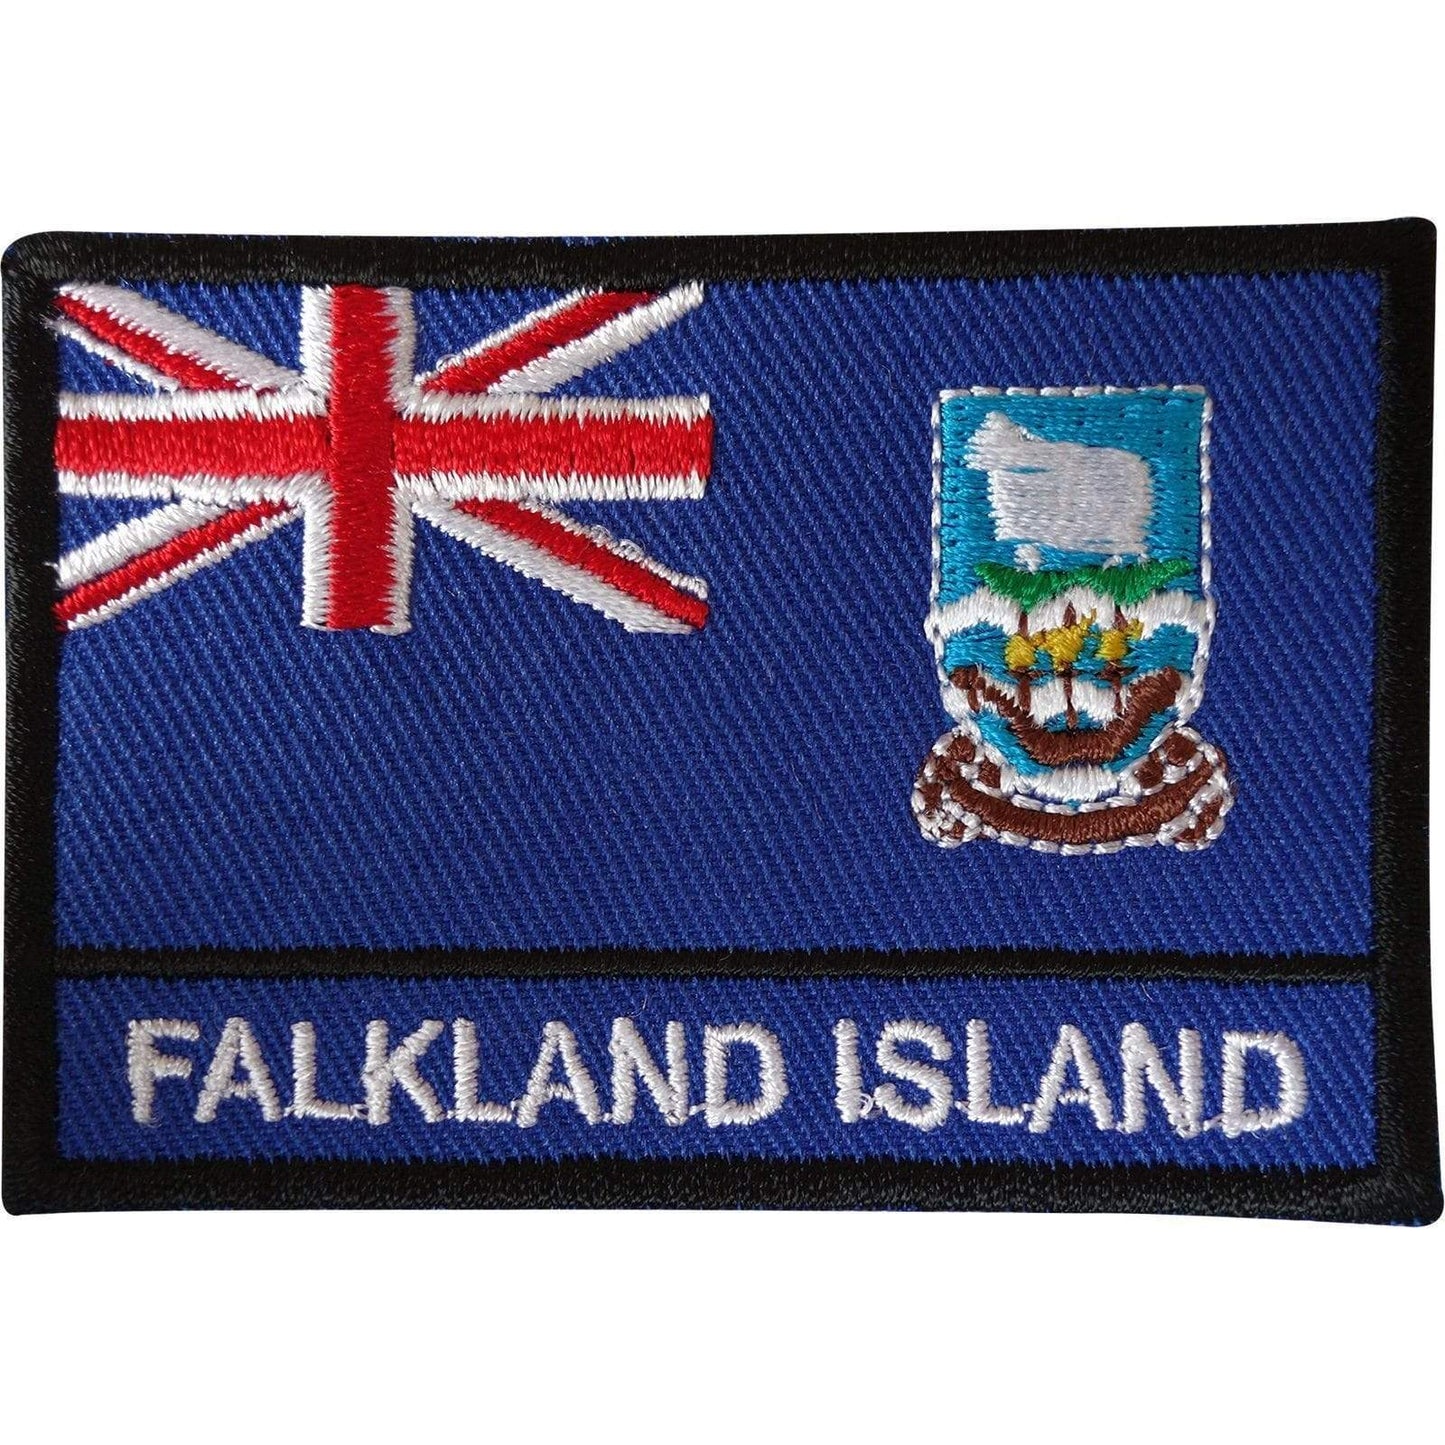 Falkland Islands Flag Patch Sew On Cloth Jacket Jeans T Shirt Embroidered Badge